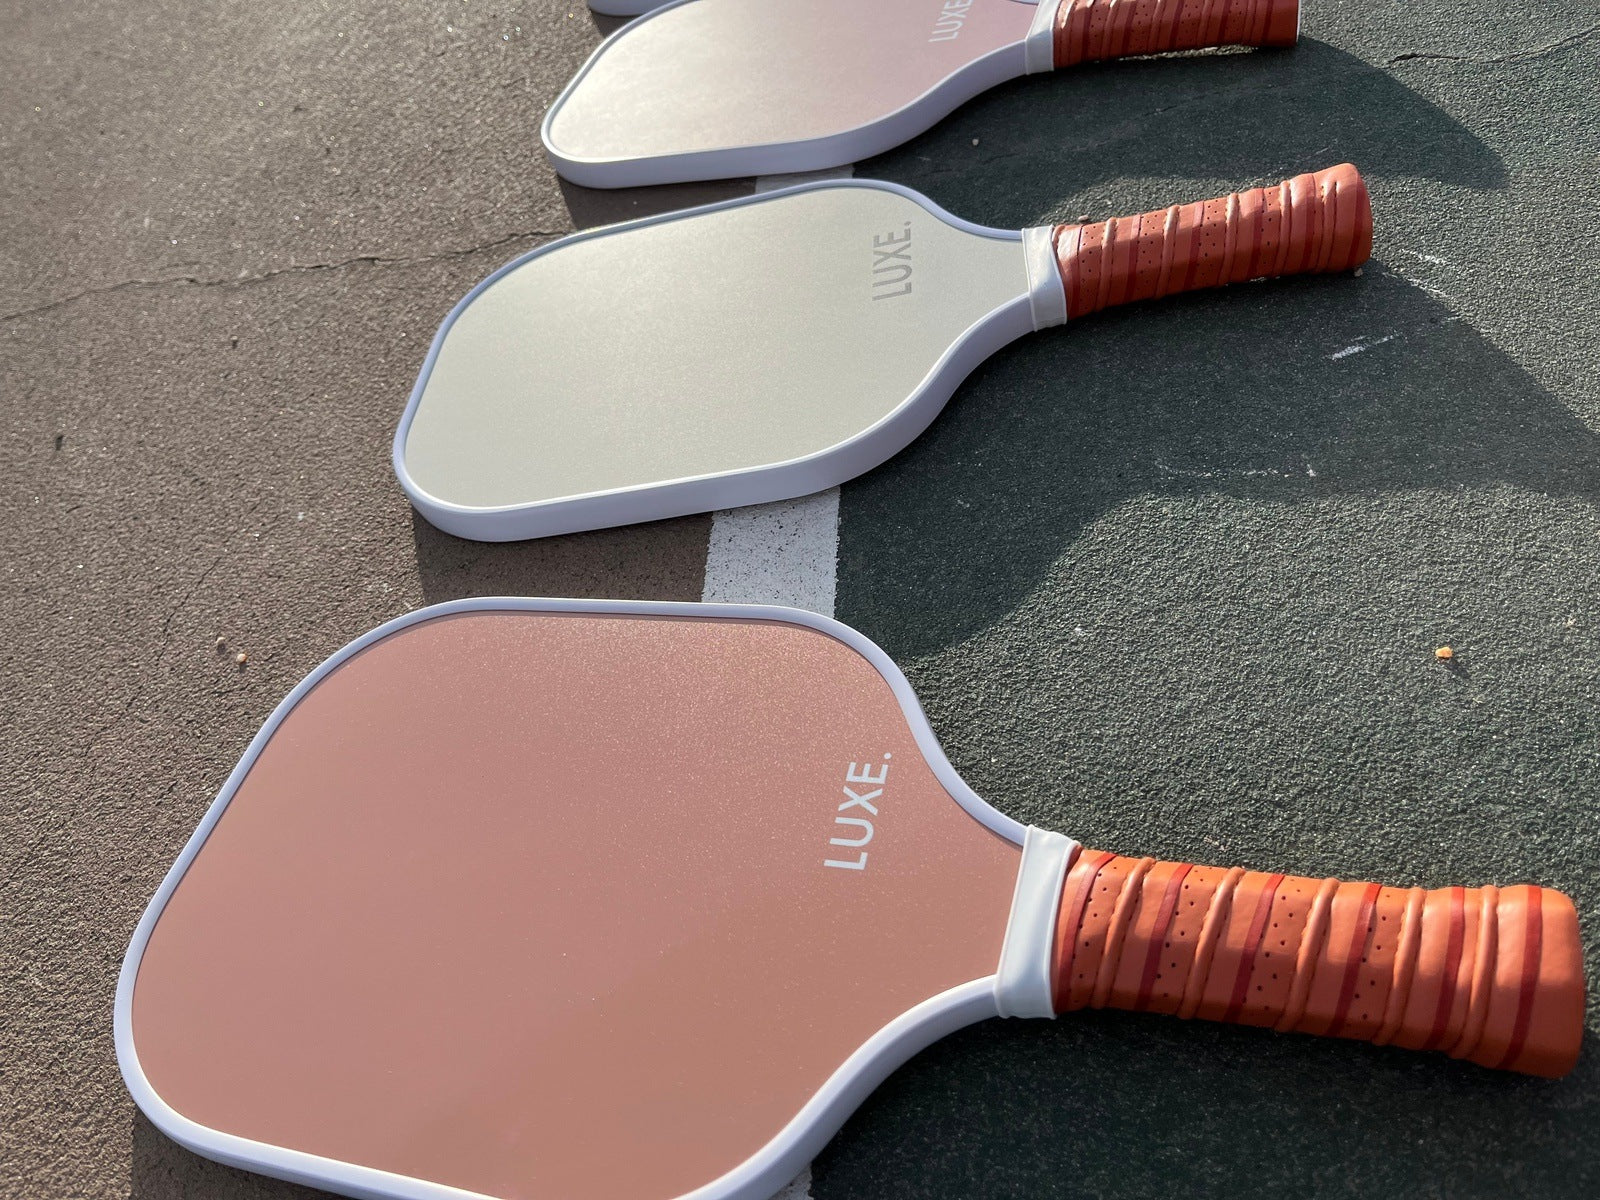 Aesthetic Solids LUXE Pickleball Paddle. Cute and aesthetic pickleball paddles